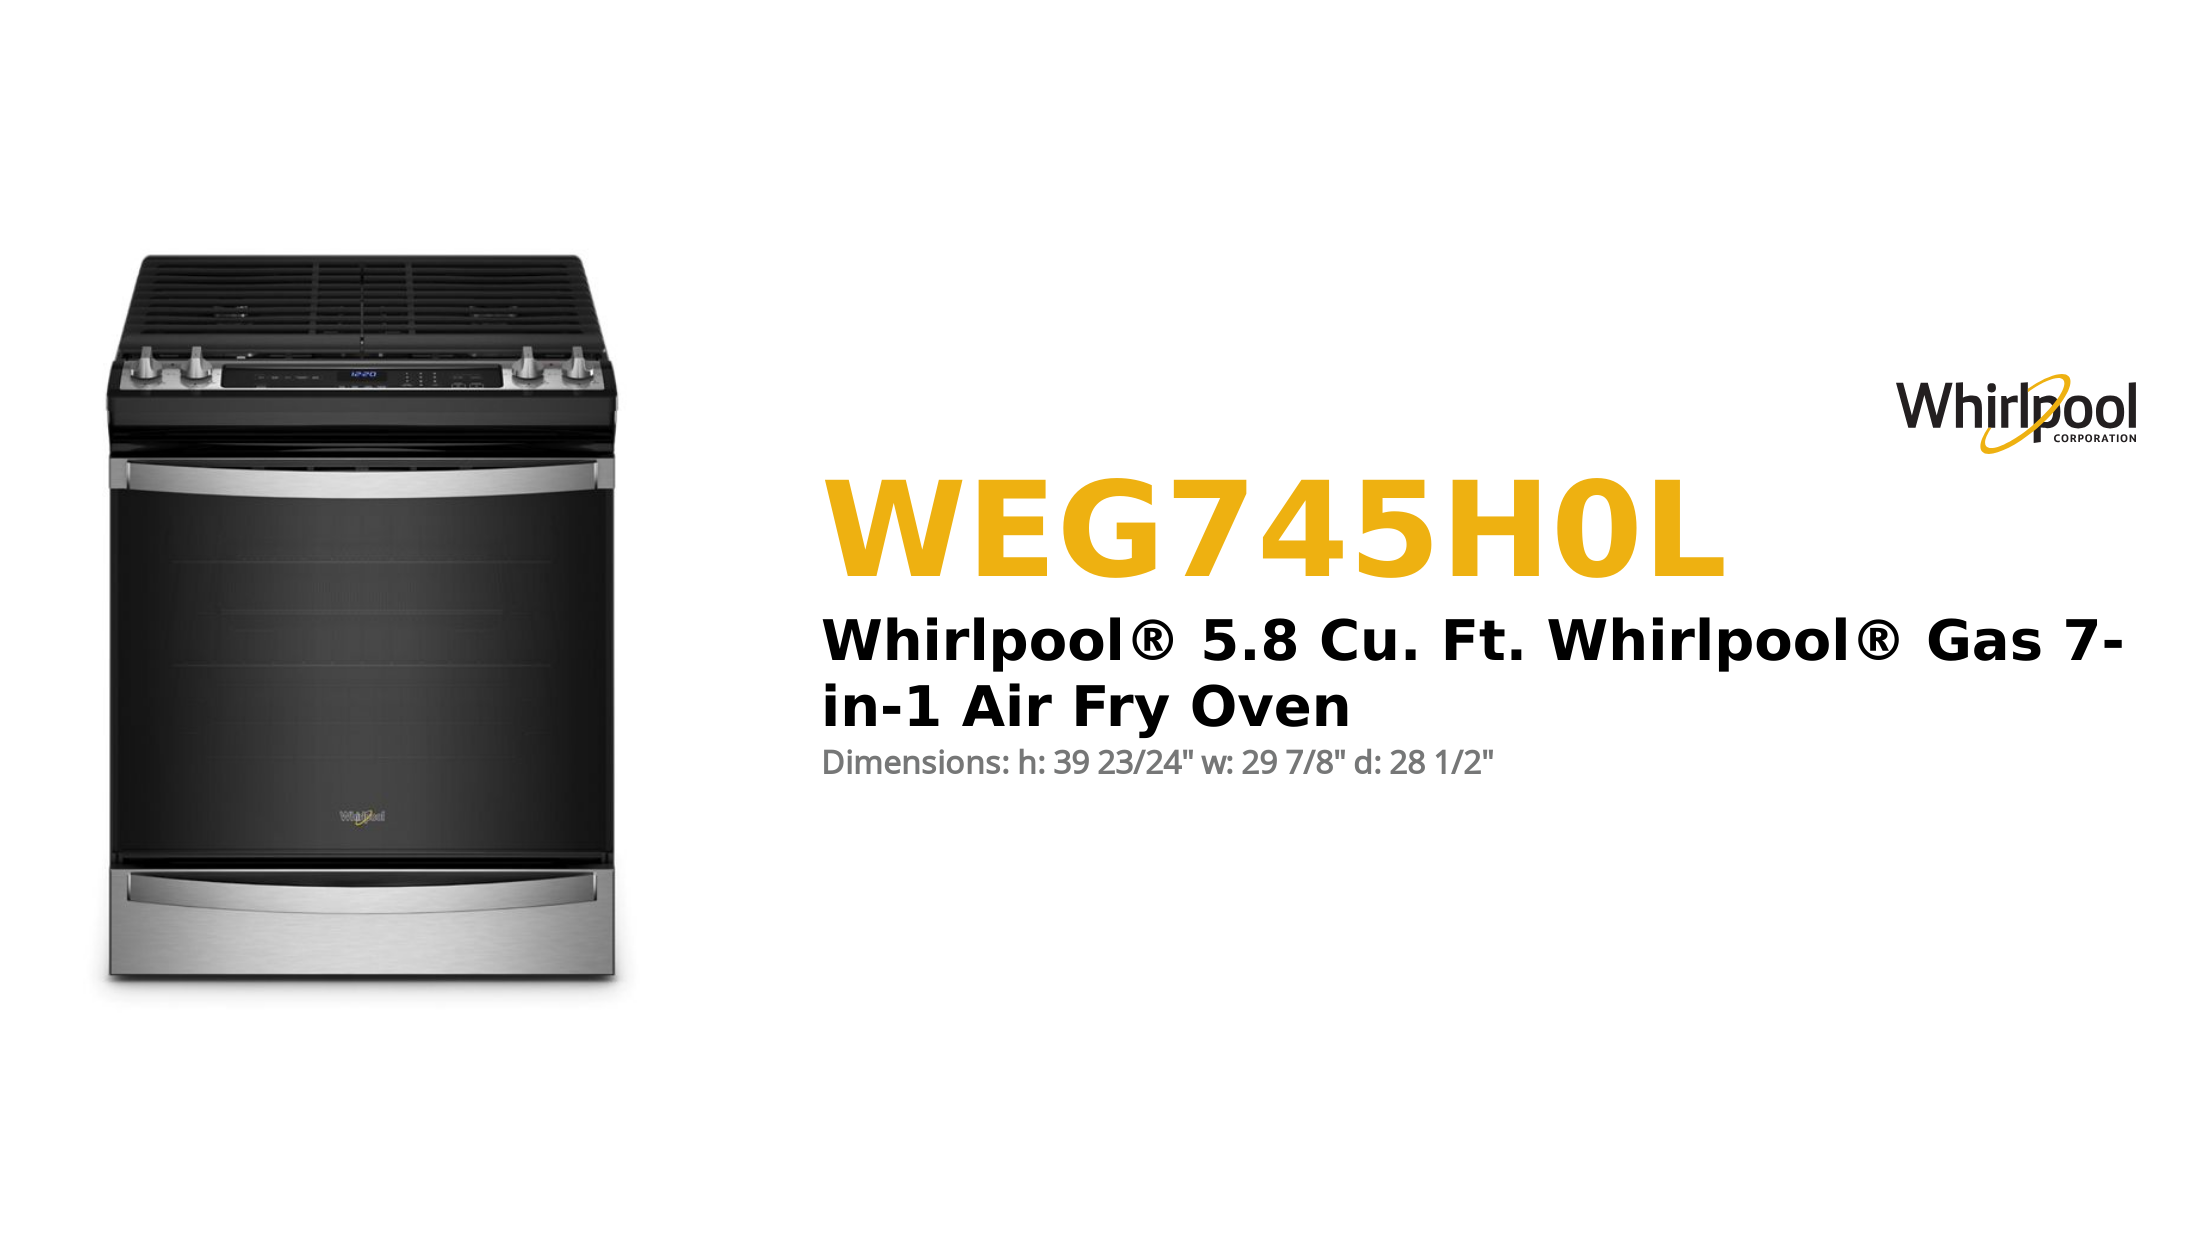 Whirlpool® 5.8 Cu. Ft. Whirlpool® Gas 7-in-1 Air Fry Oven